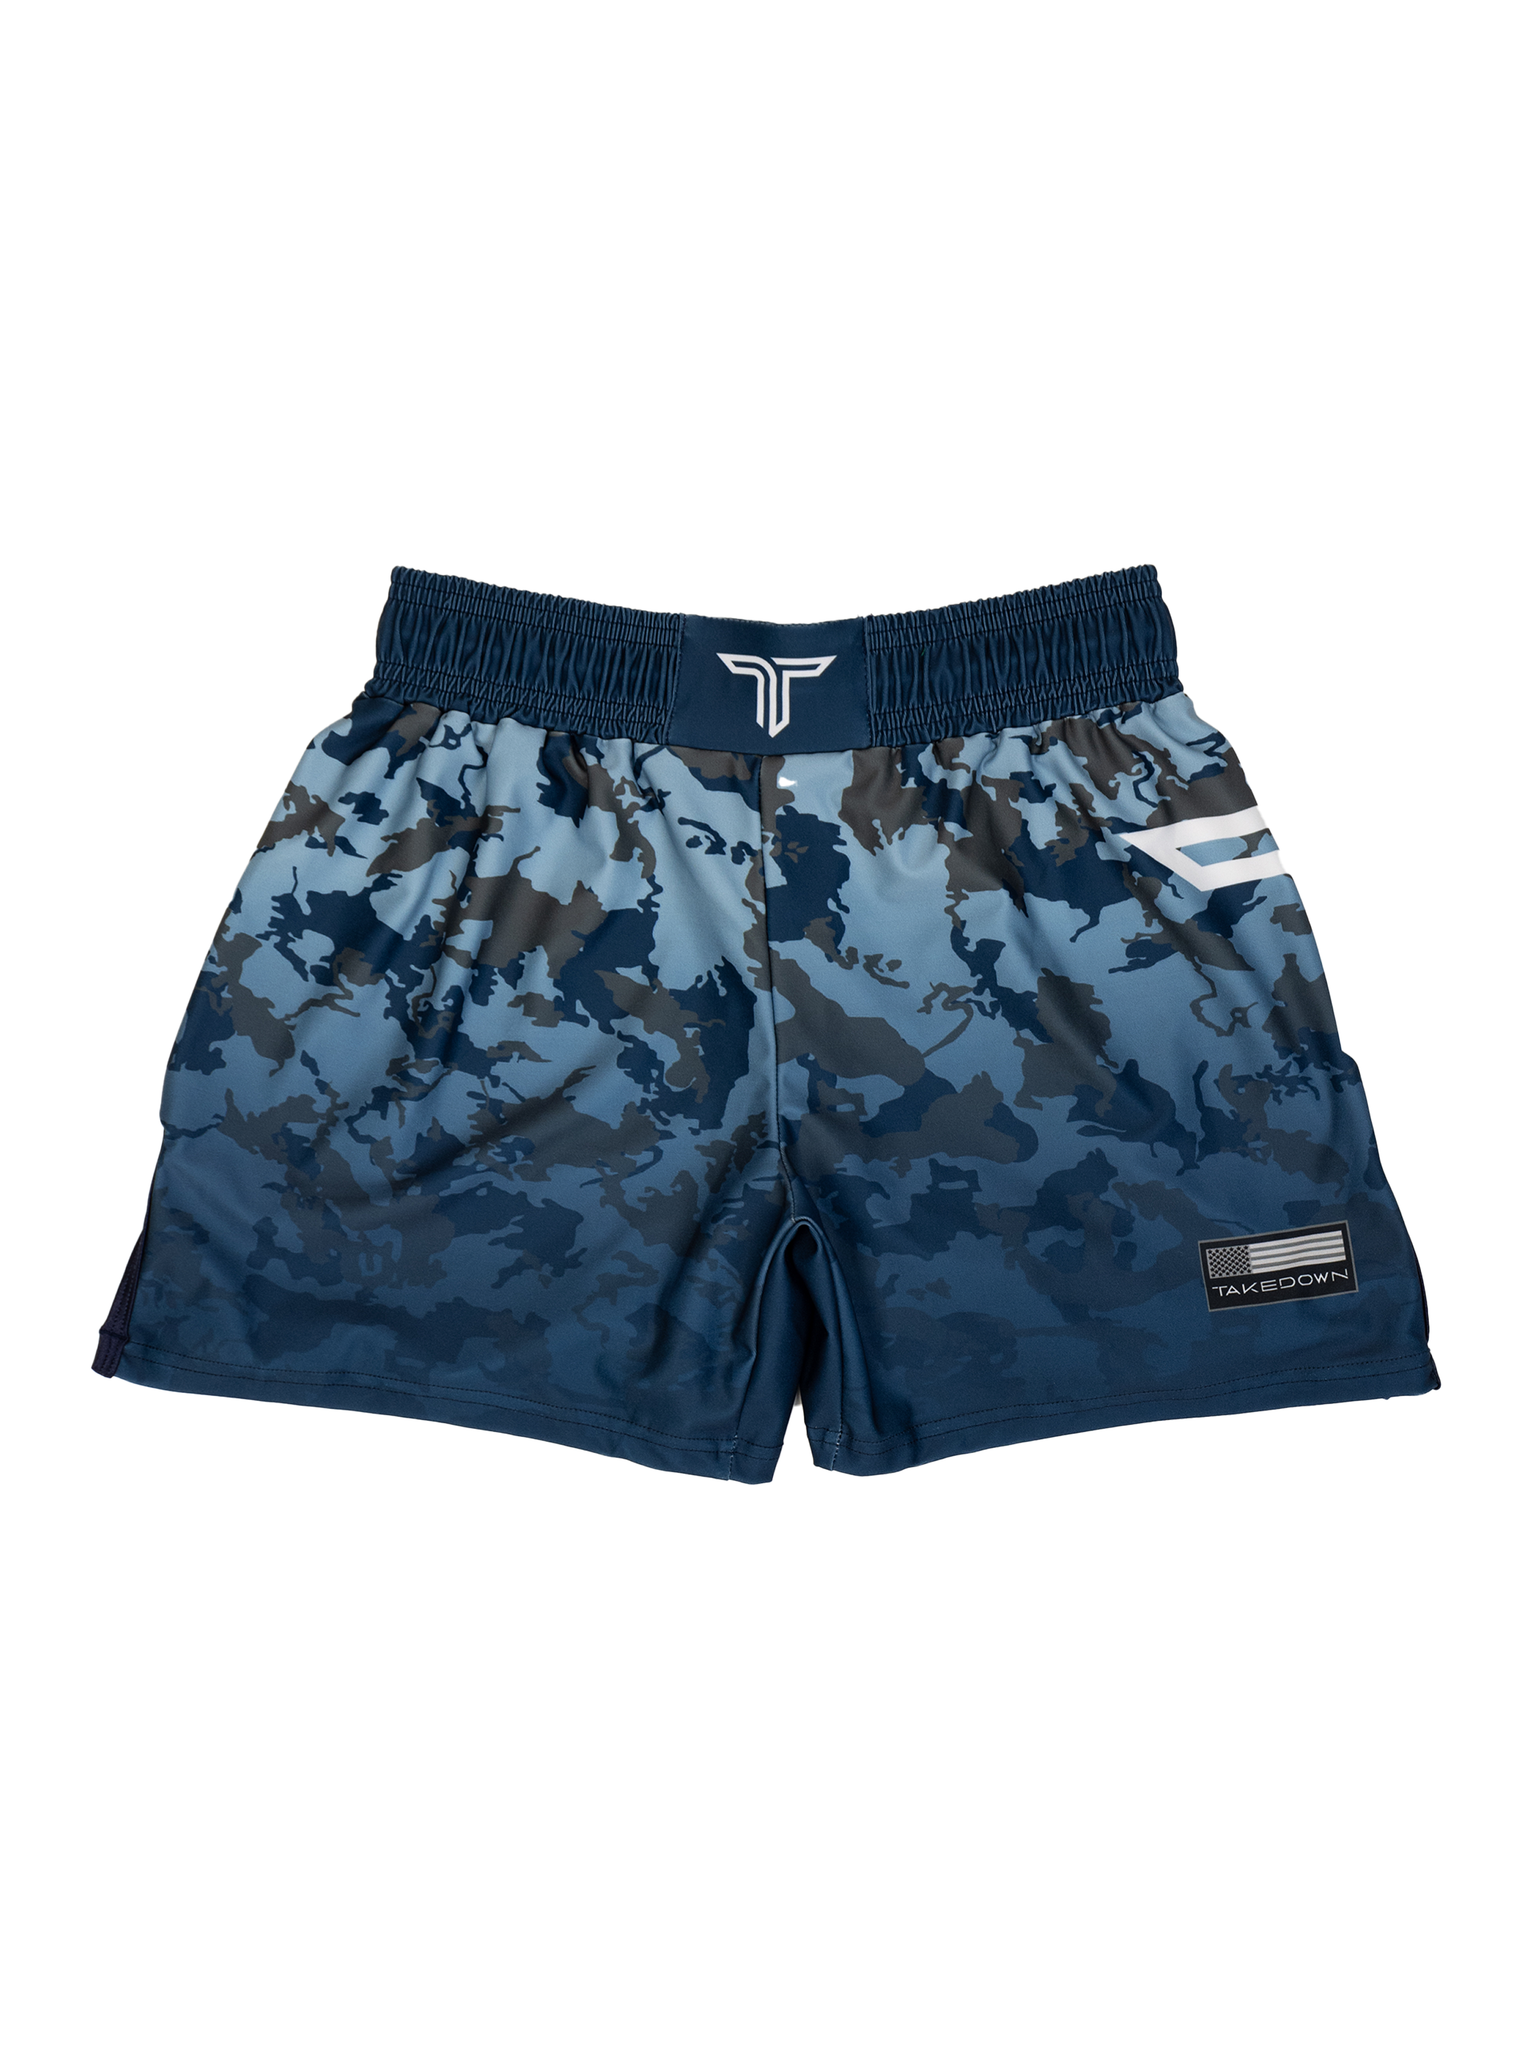 Particle Camo Women's Fight Shorts - Ink (3" & 5" Inseam)